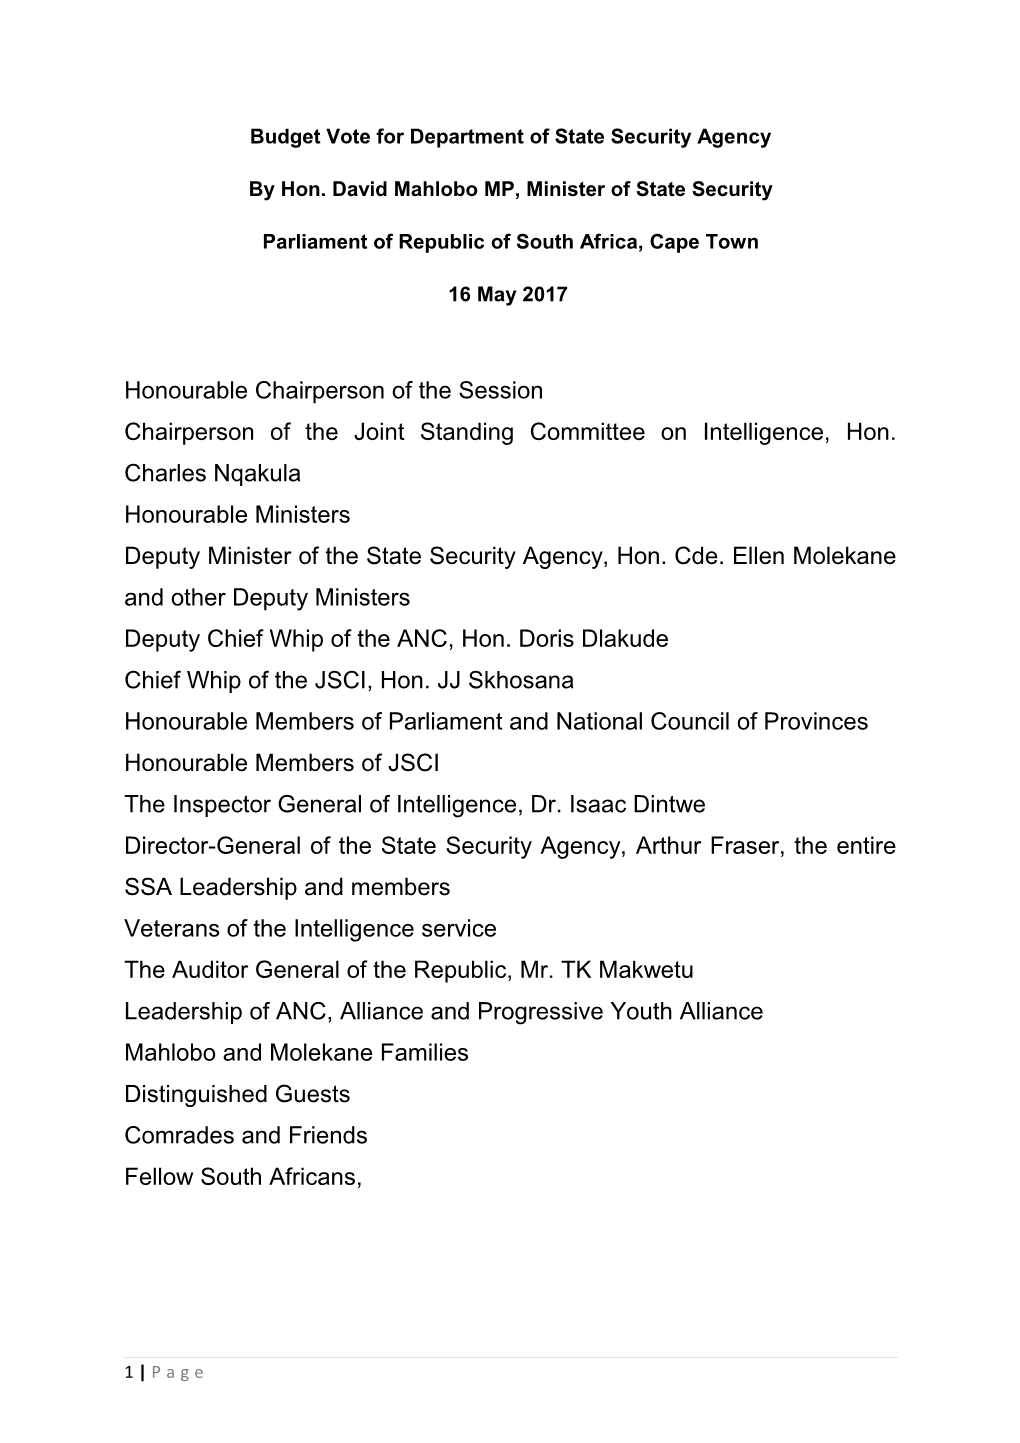 Budget Vote for Department of State Security Agency